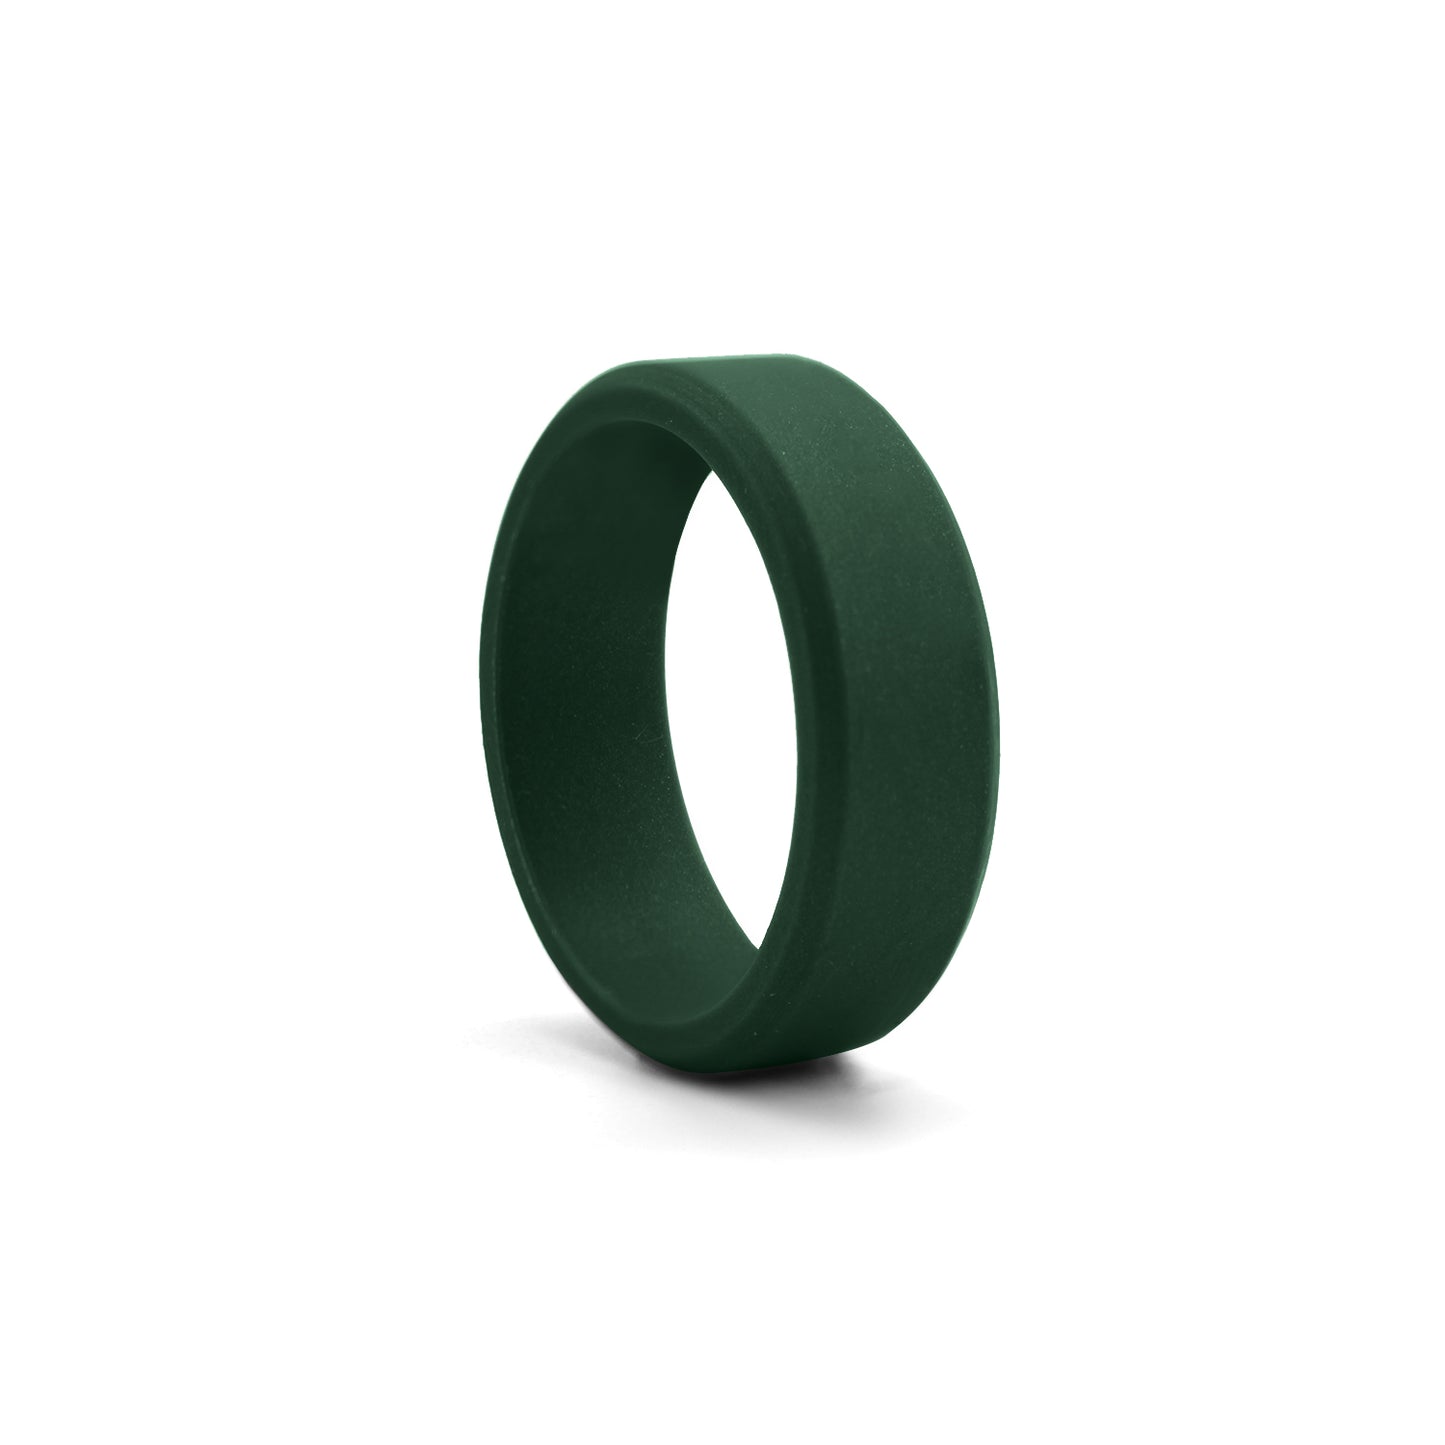 Bevel Silicone Rings